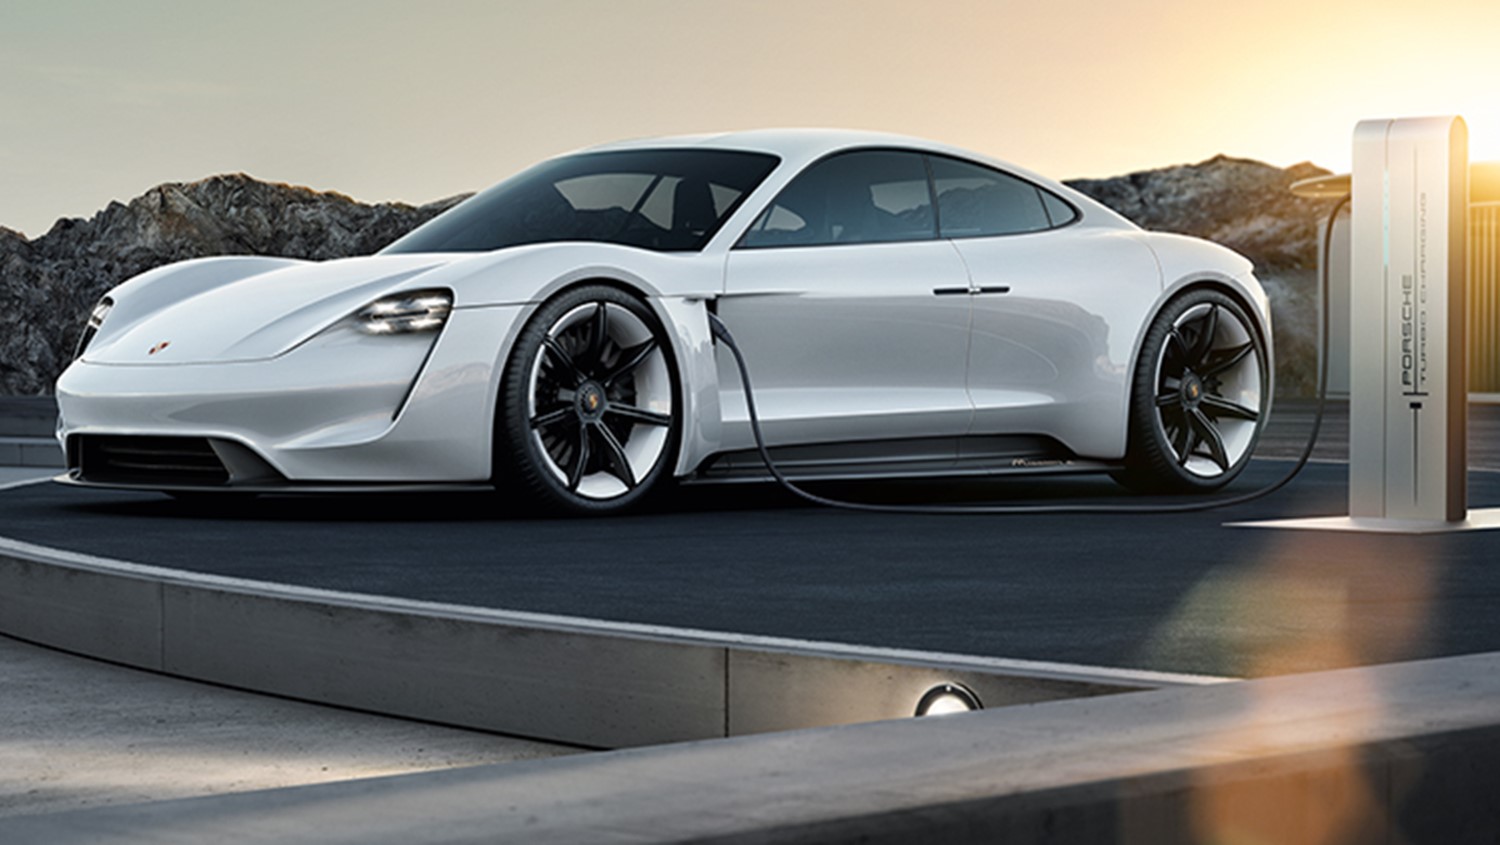 Of course future Porsches will be all-electric and won't need an intake manifold